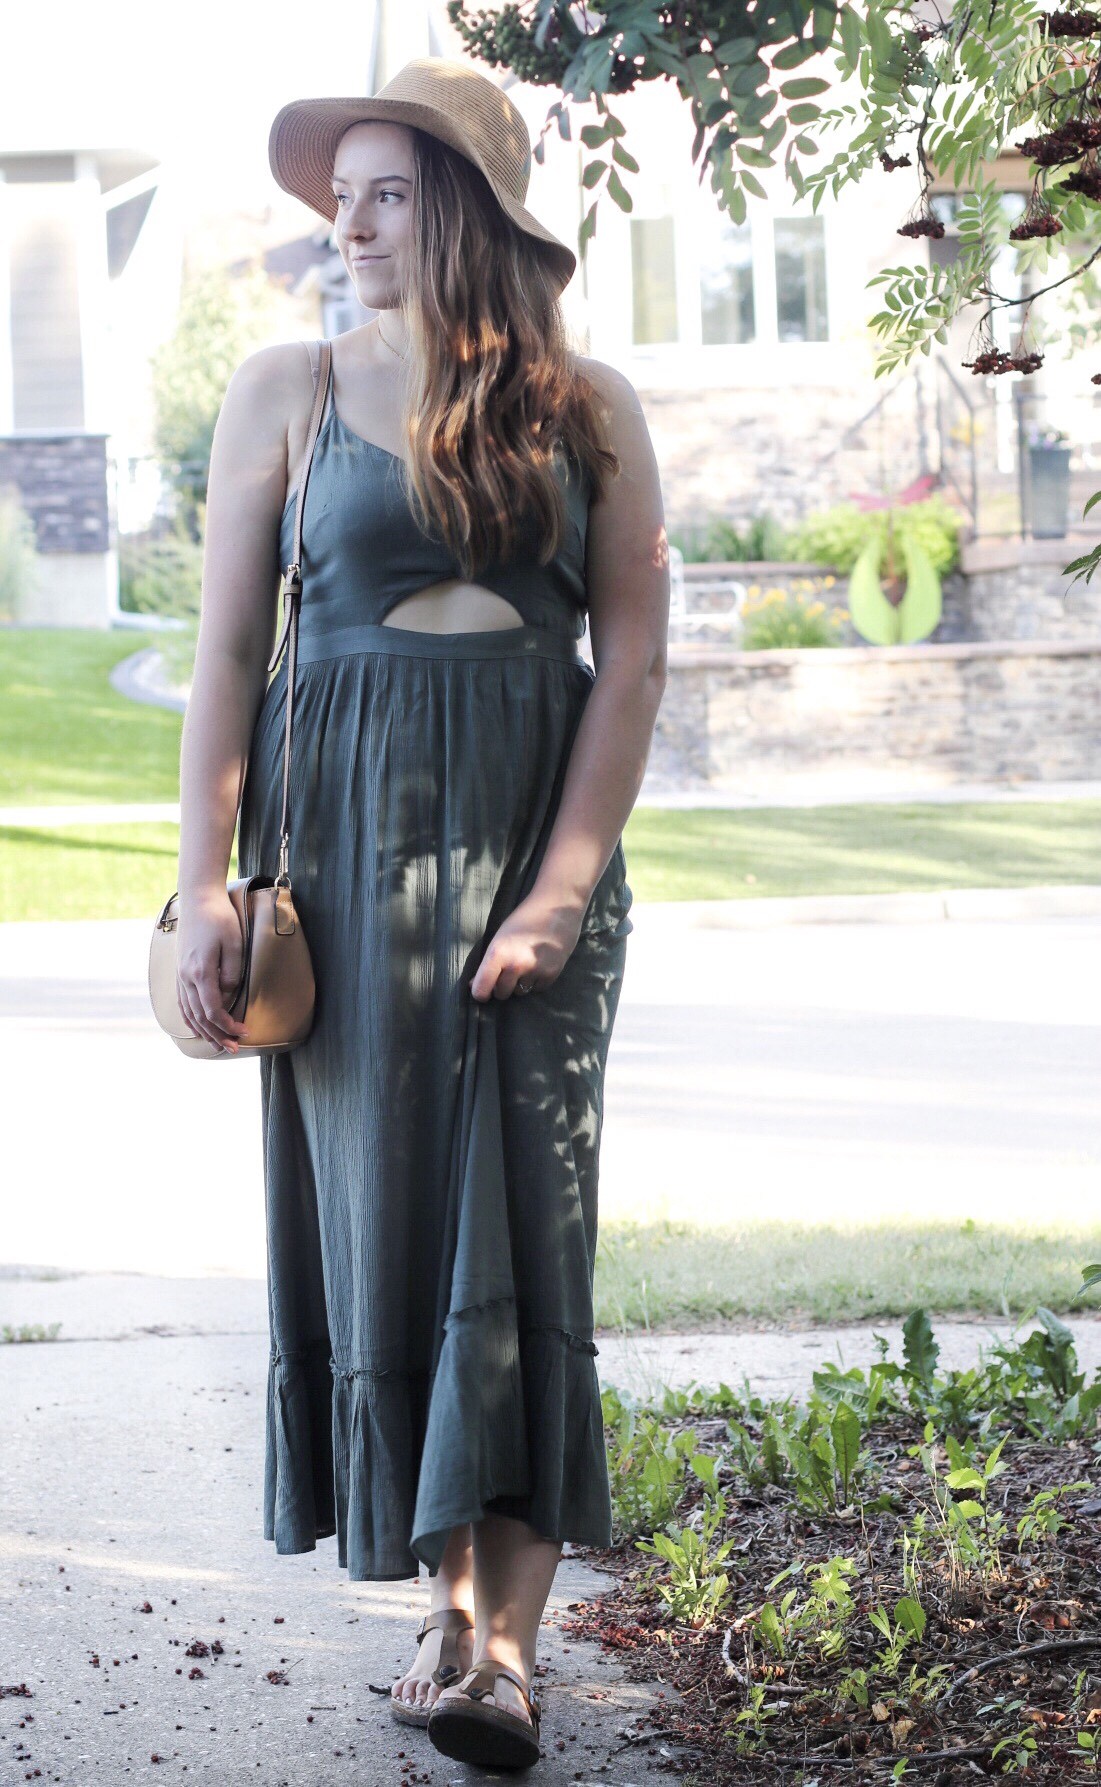 My love of flattering, green maxi dresses began when I was pregnant with Adeline – not only is my favourite colour green but chasing after 2 toddlers with a baby bump was hard enough without my pants or shirt were cutting into my waist